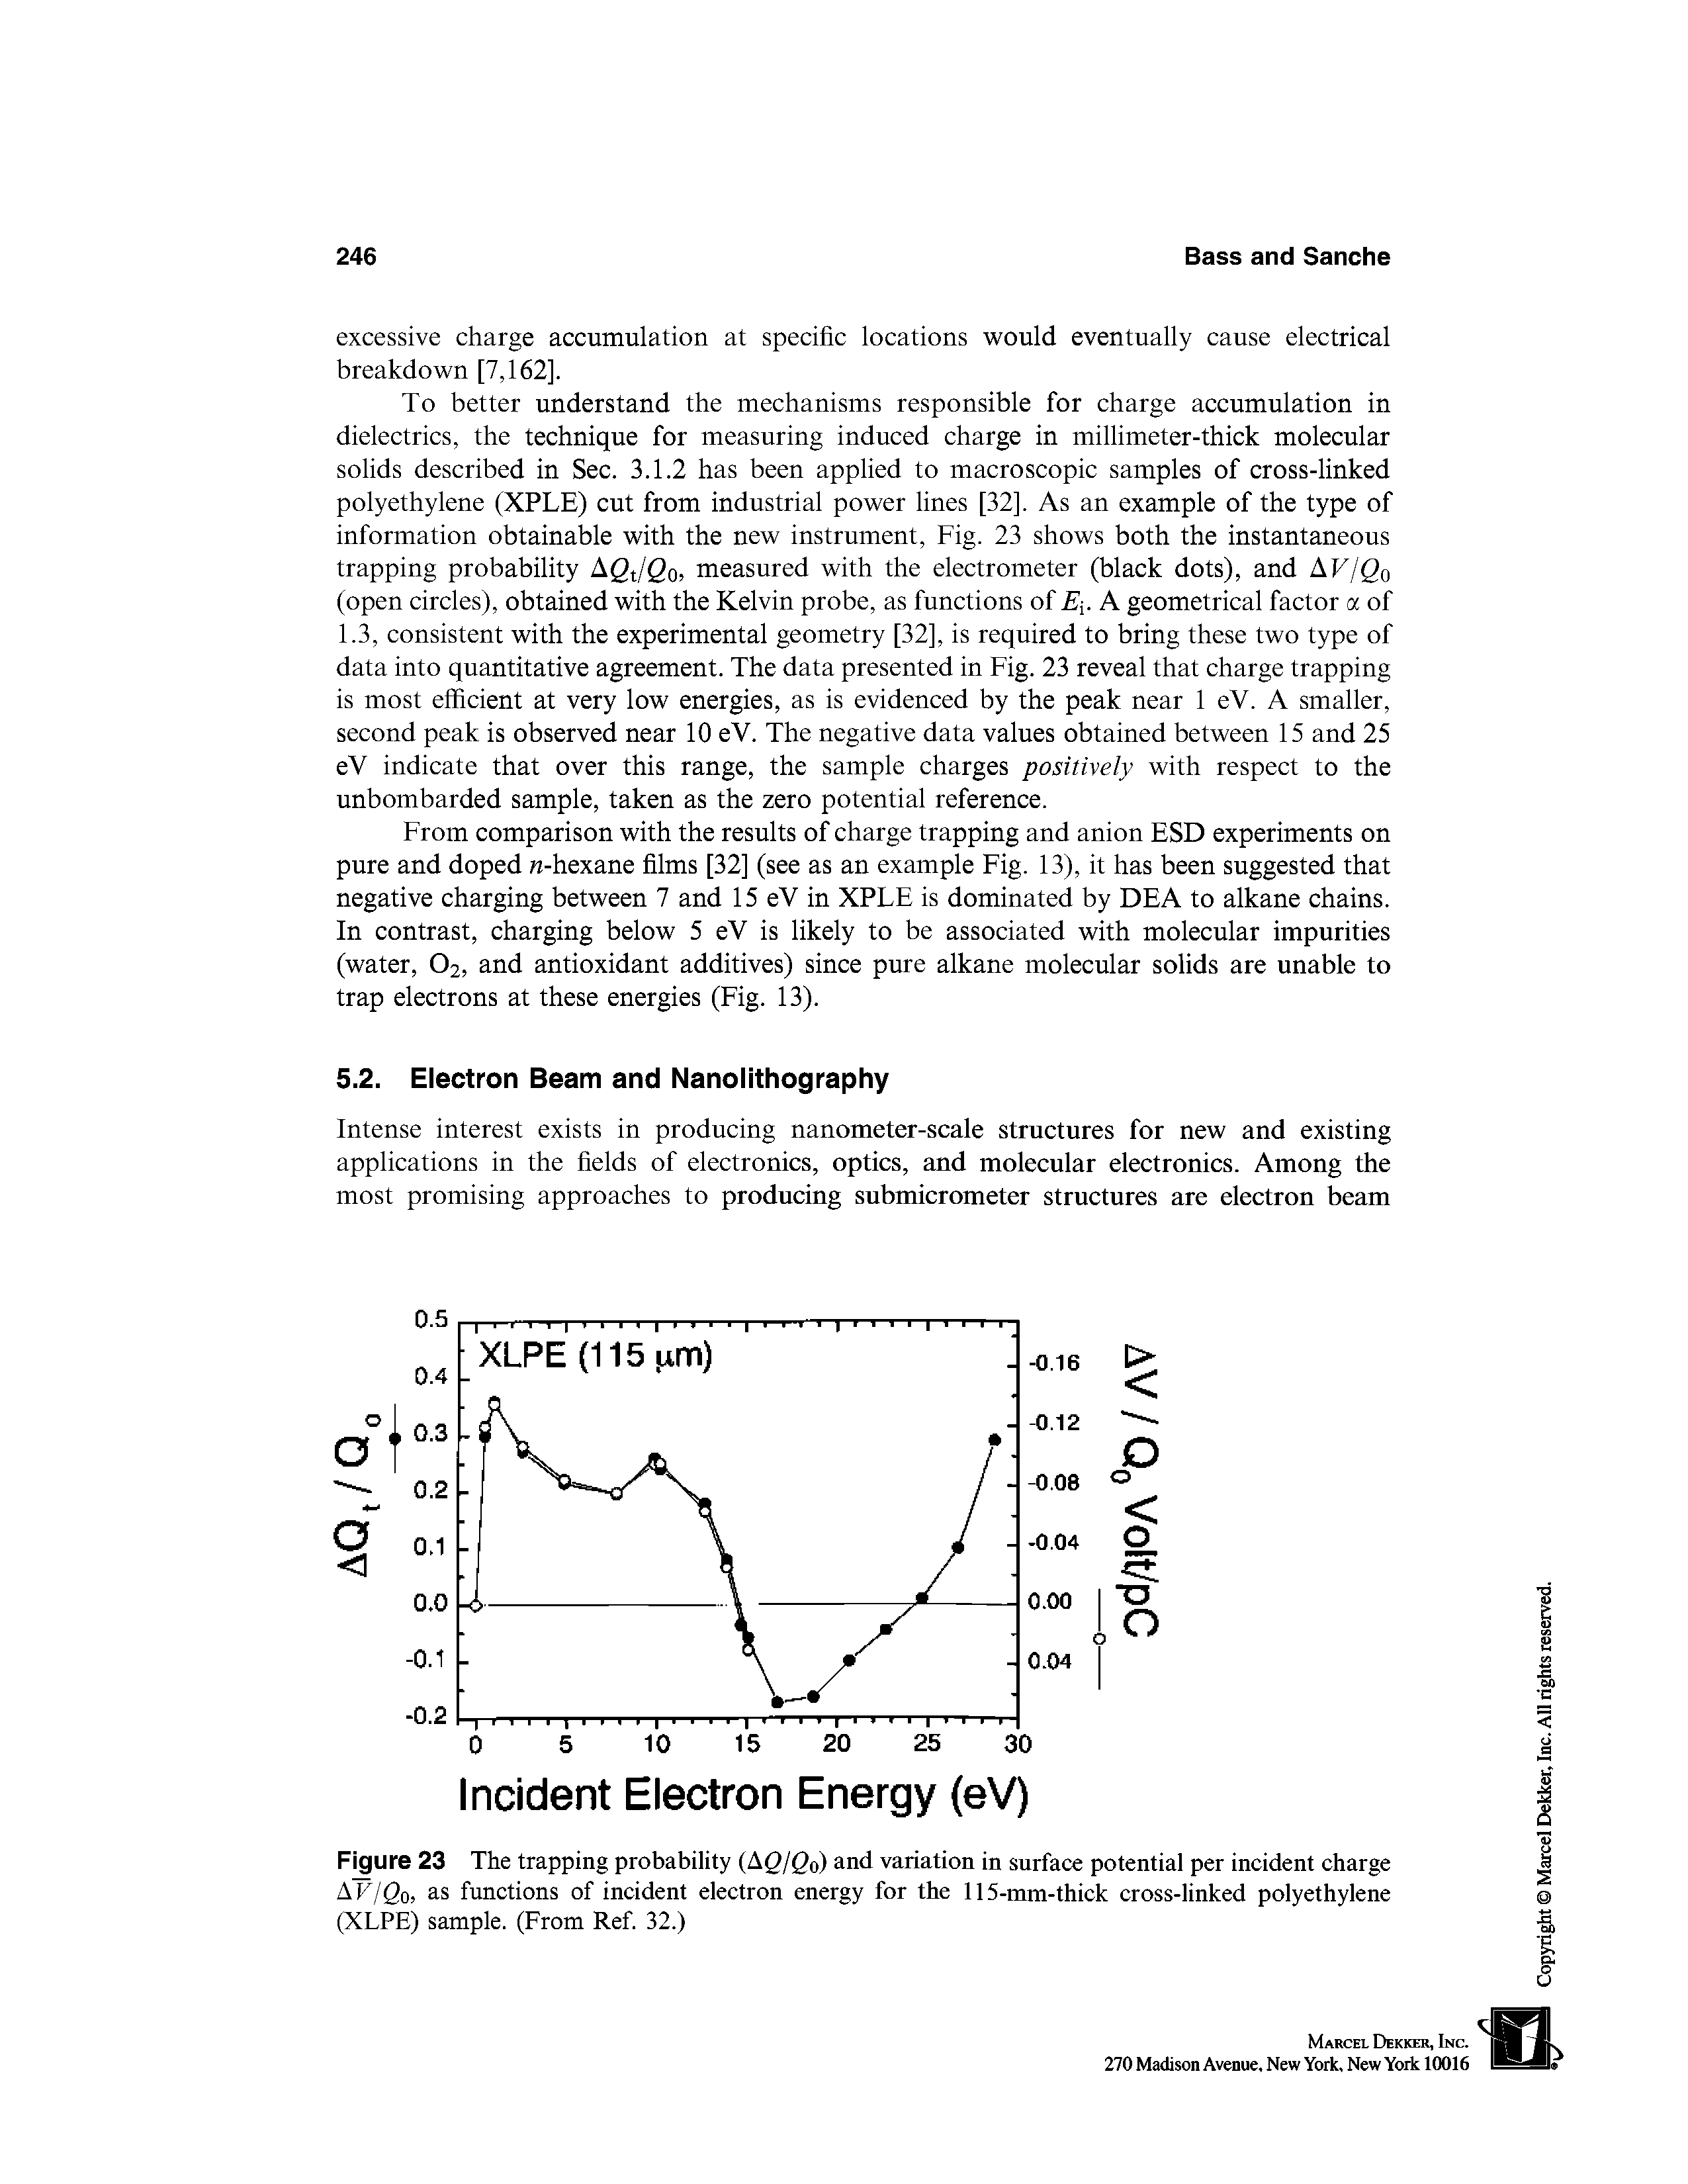 Figure 23 The trapping probability (Ag/go) and variation in surface potential per incident charge AF/go, as functions of incident electron energy for the 115-mm-thick cross-linked polyethylene (XLPE) sample. (From Ref. 32.)...